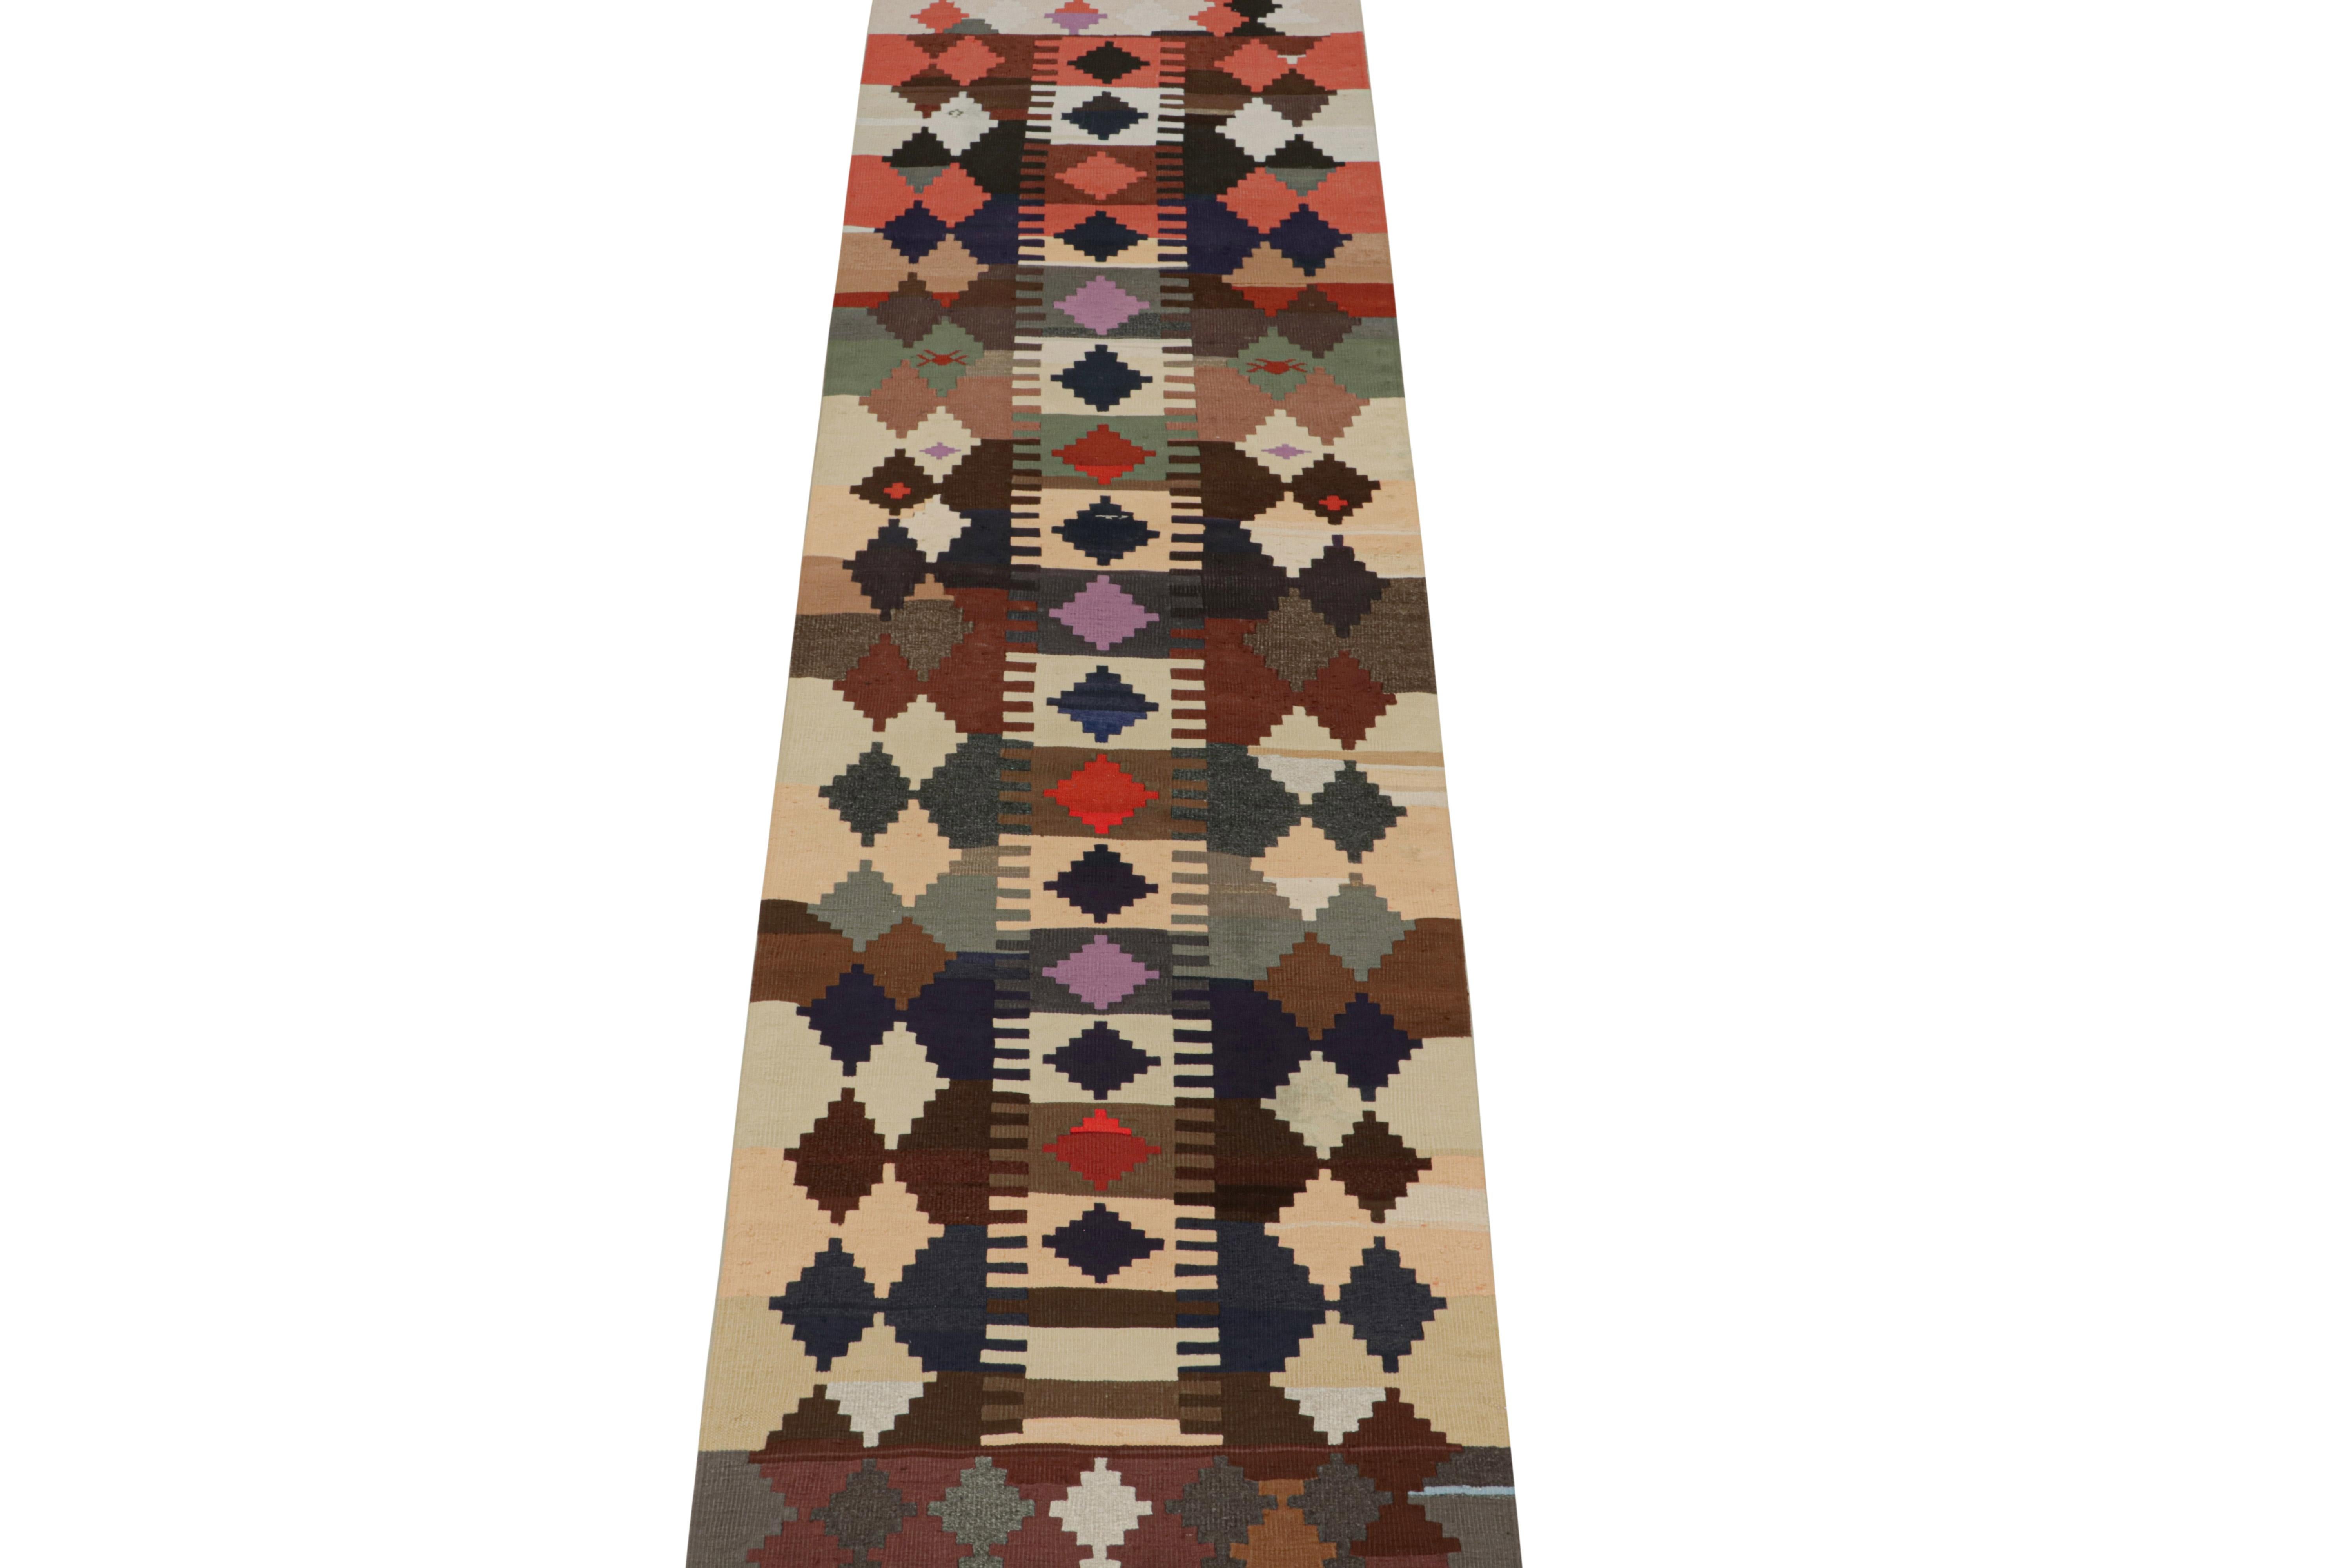 This vintage 3x11 Persian kilim runner is handwoven in wool and originates circa 1950-1960. 

Further on the Design:

This design favors a vibrant polychromatic colorway and sharply woven geometric patterns—especially diamond patterns in its field.